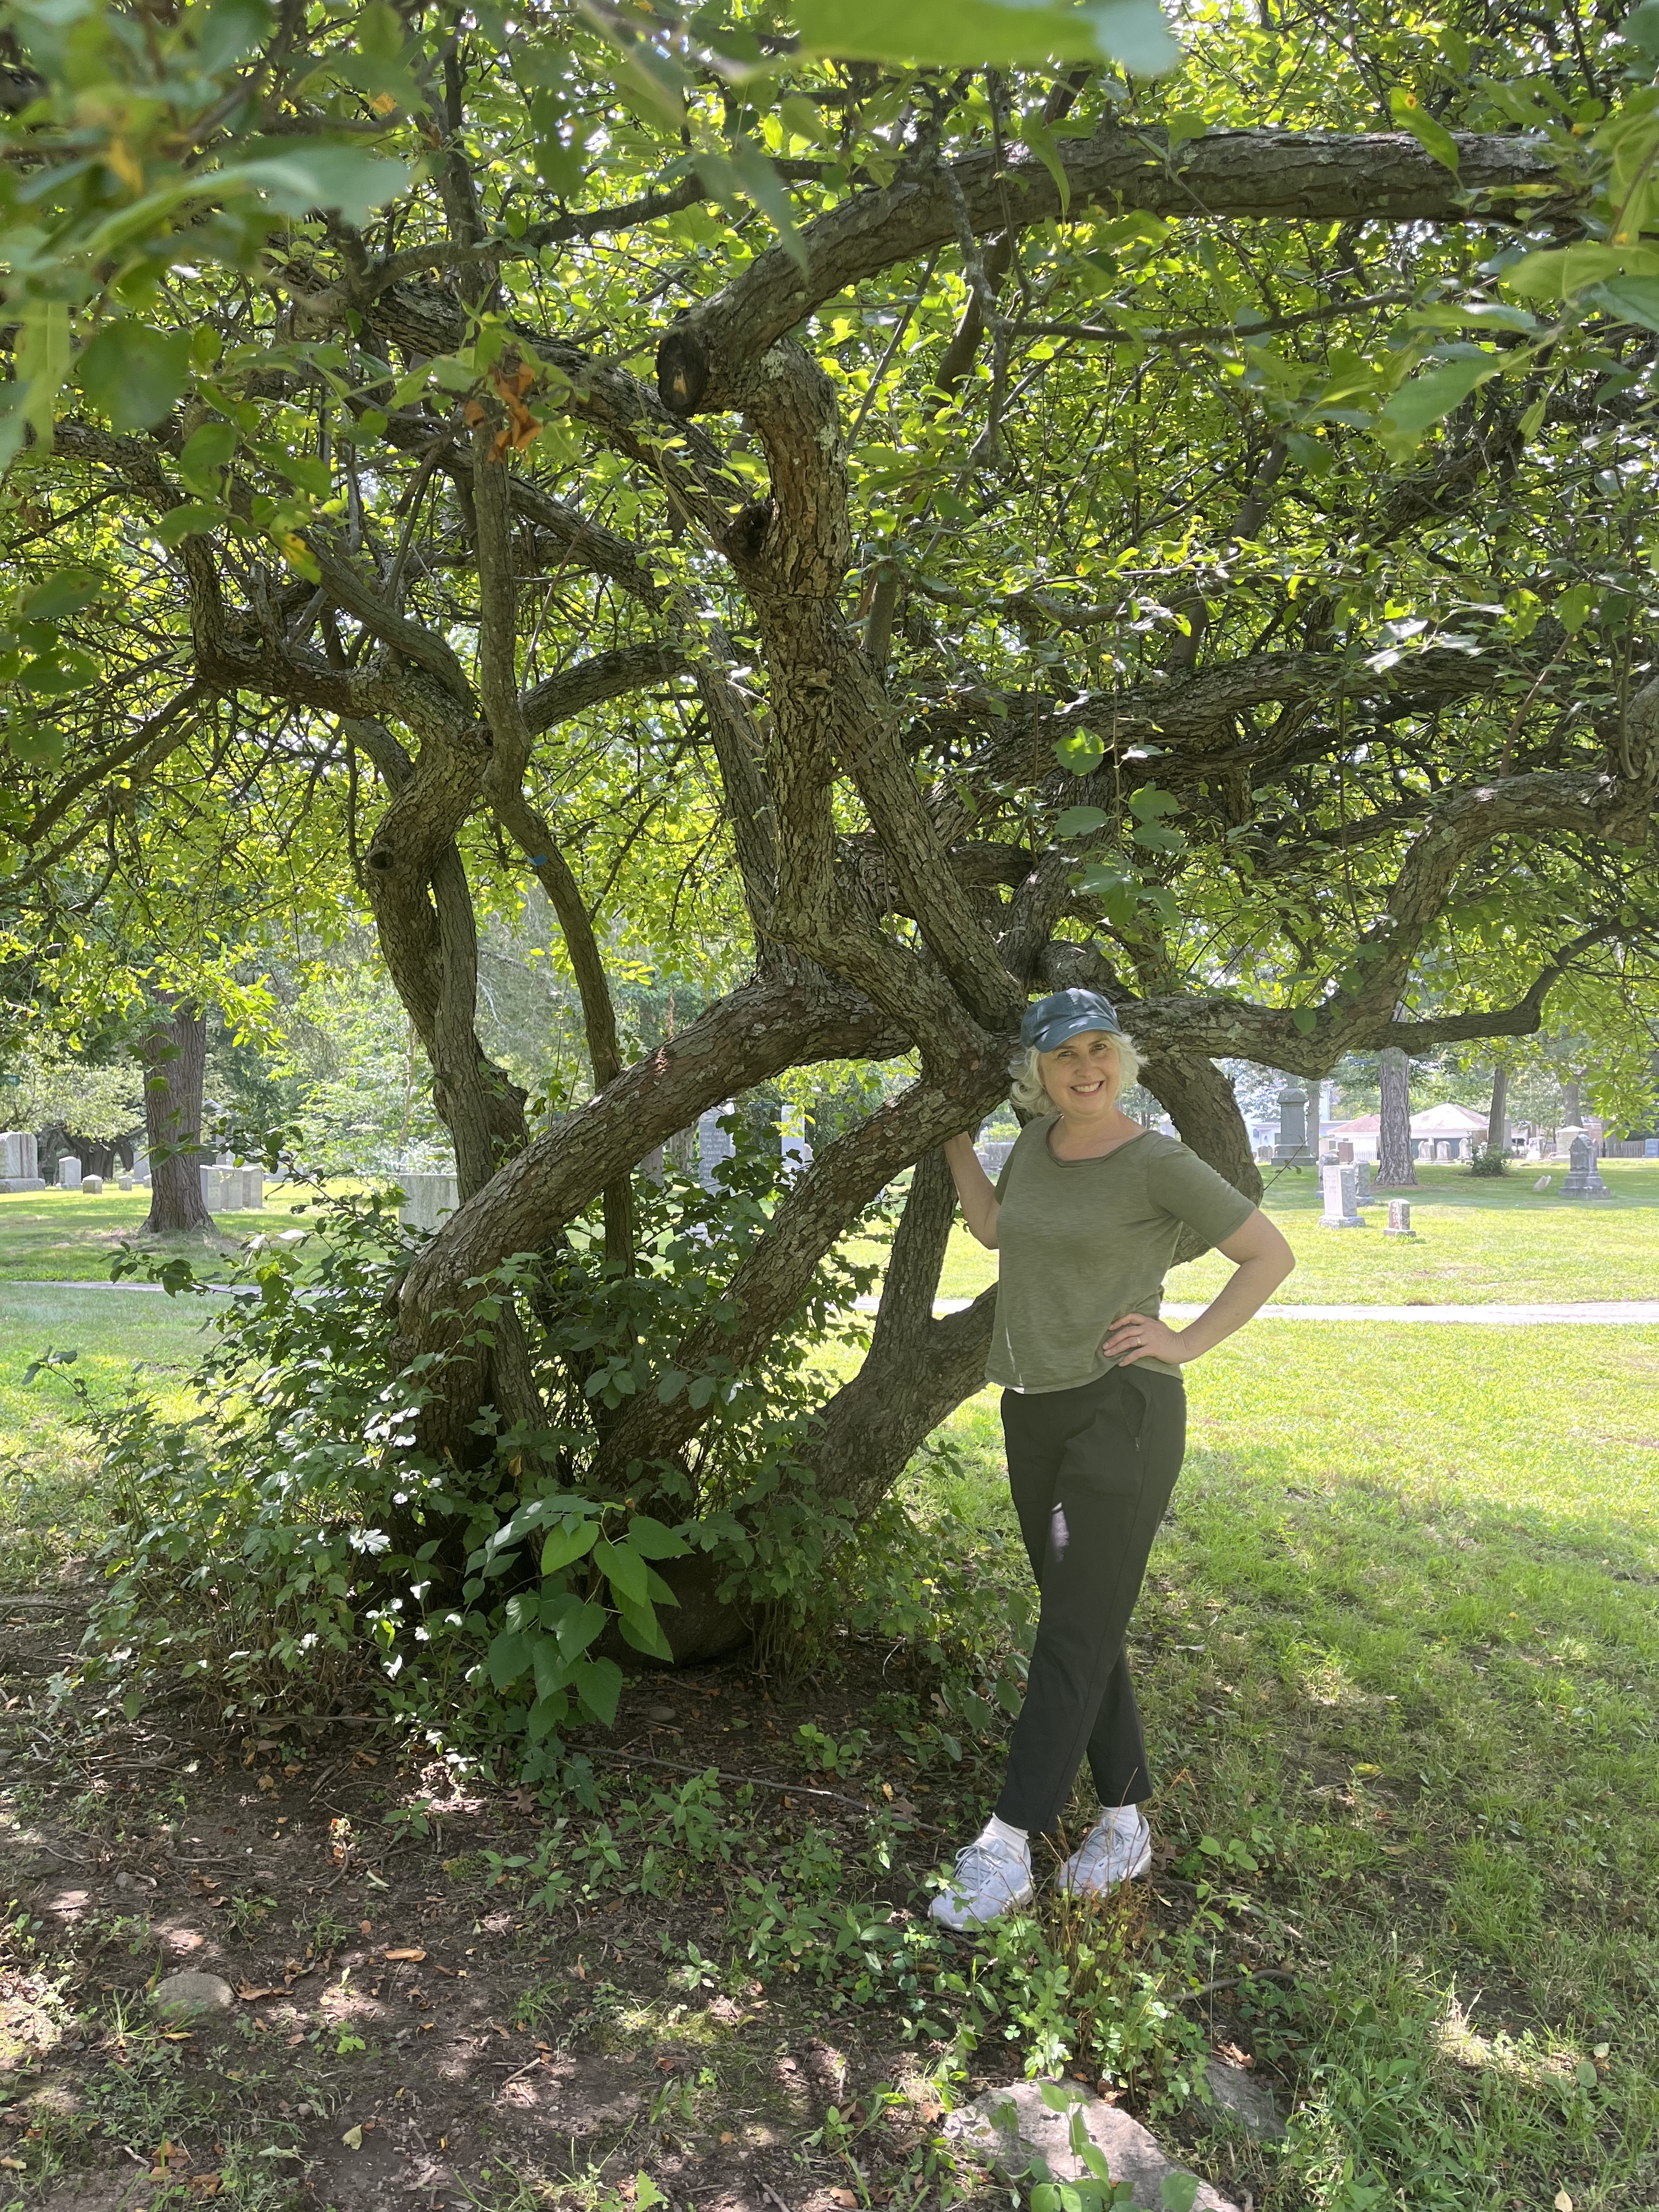 Dr. Delissio with a favorite Arboretum tree